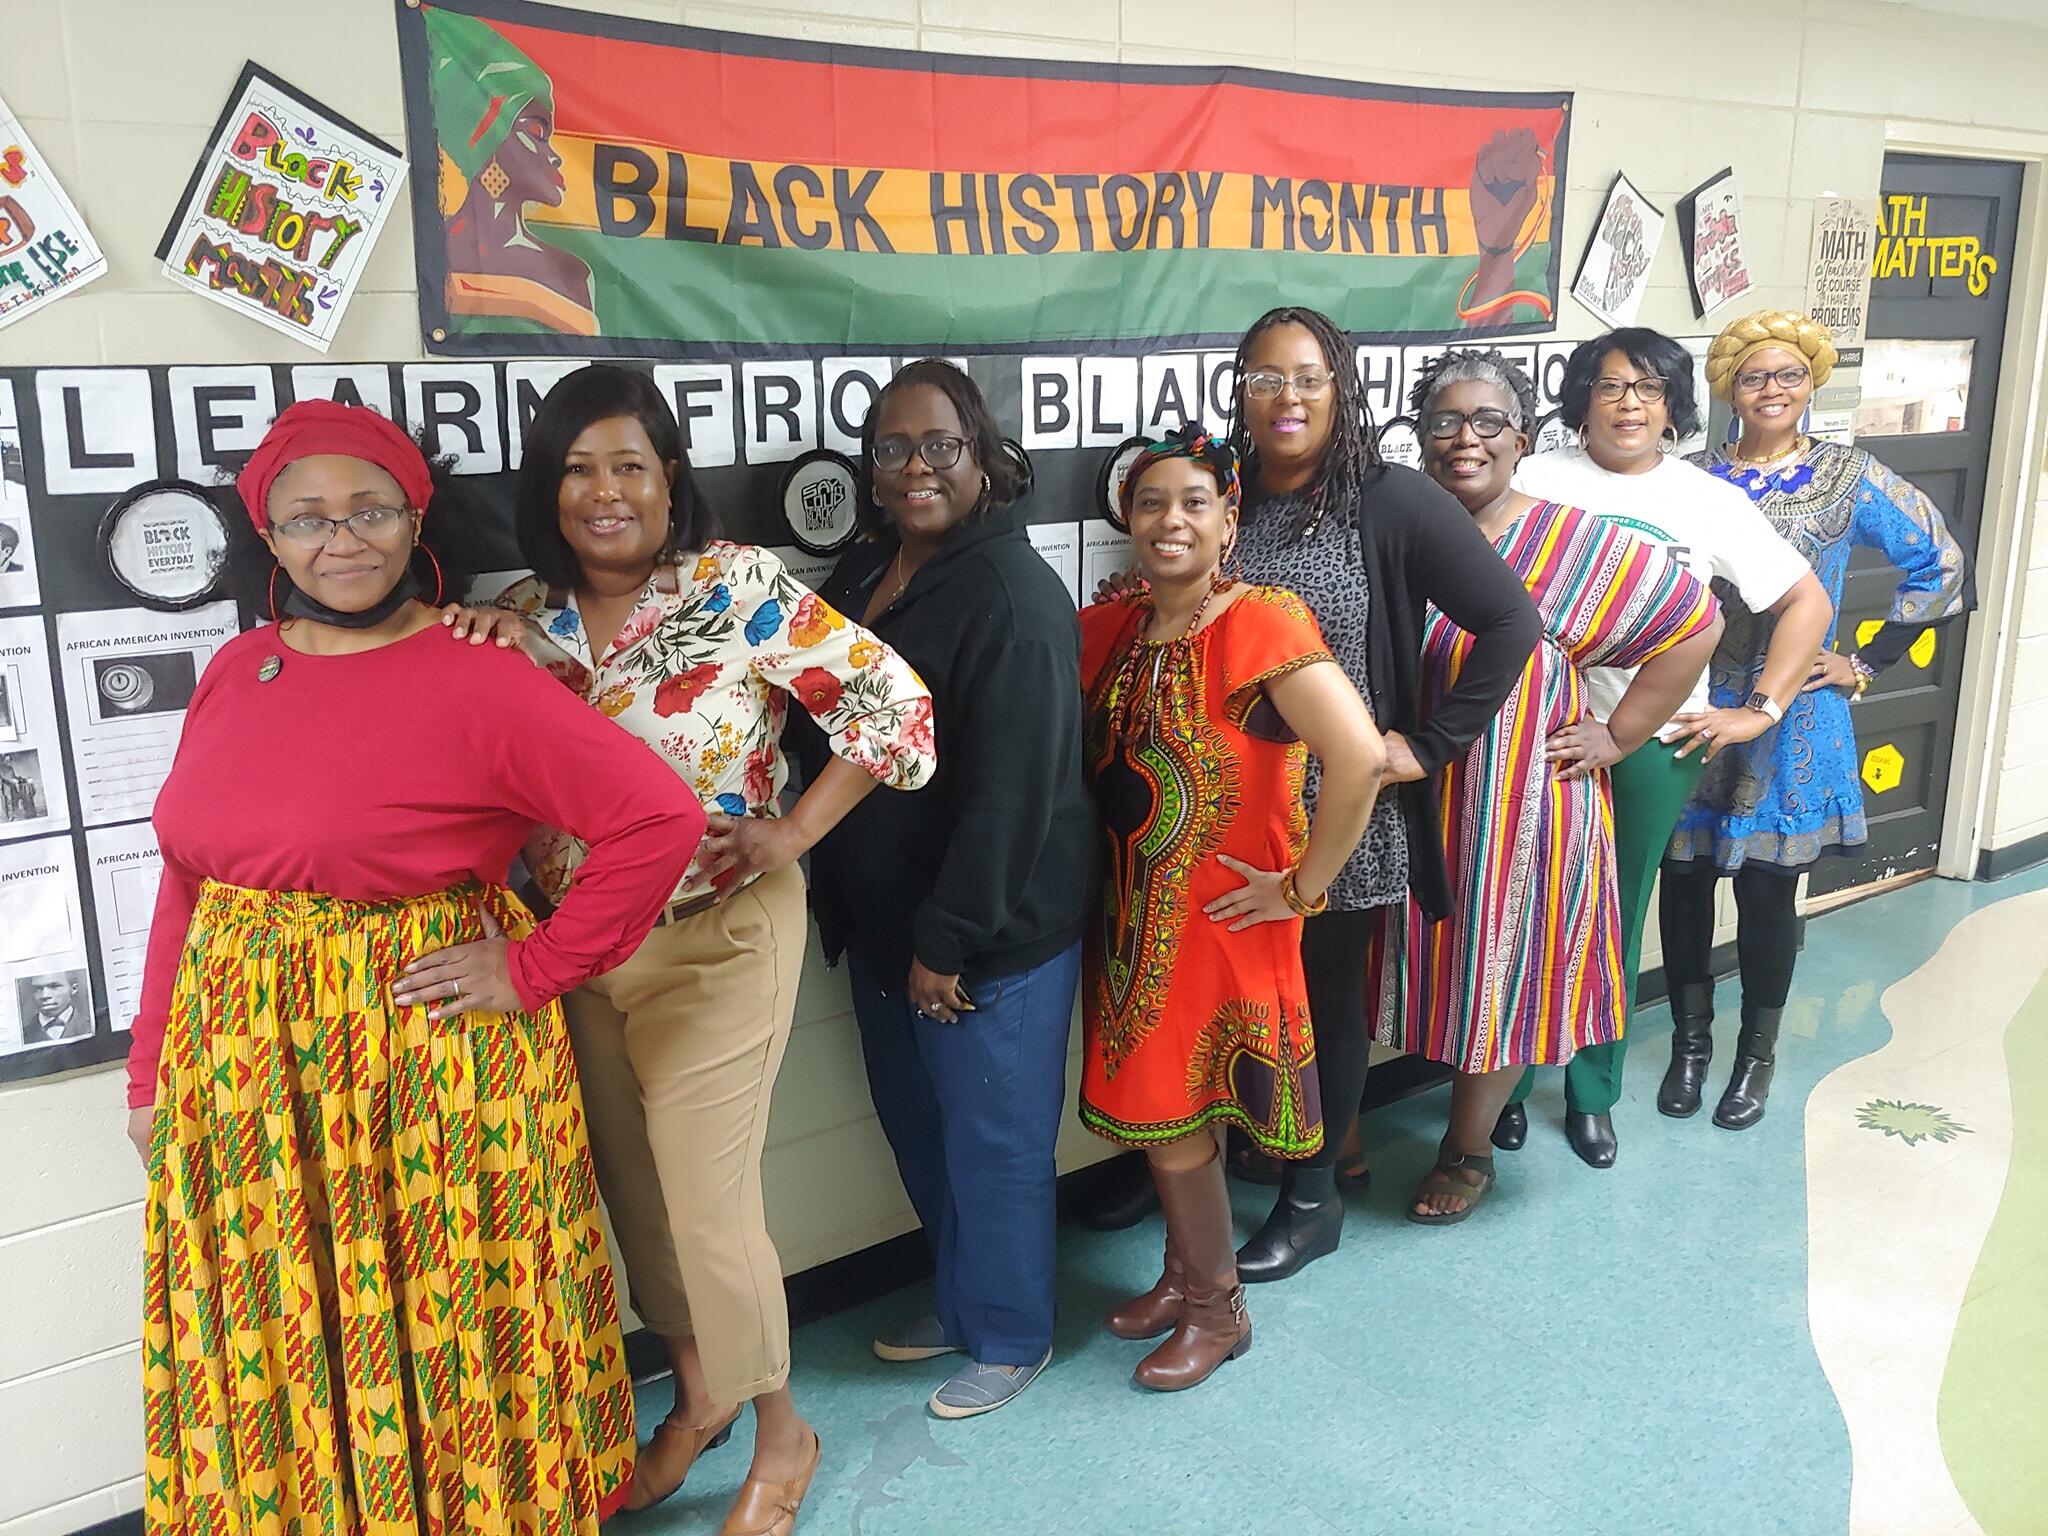 TLC staff dressed as notable Black Americans for Black History Month